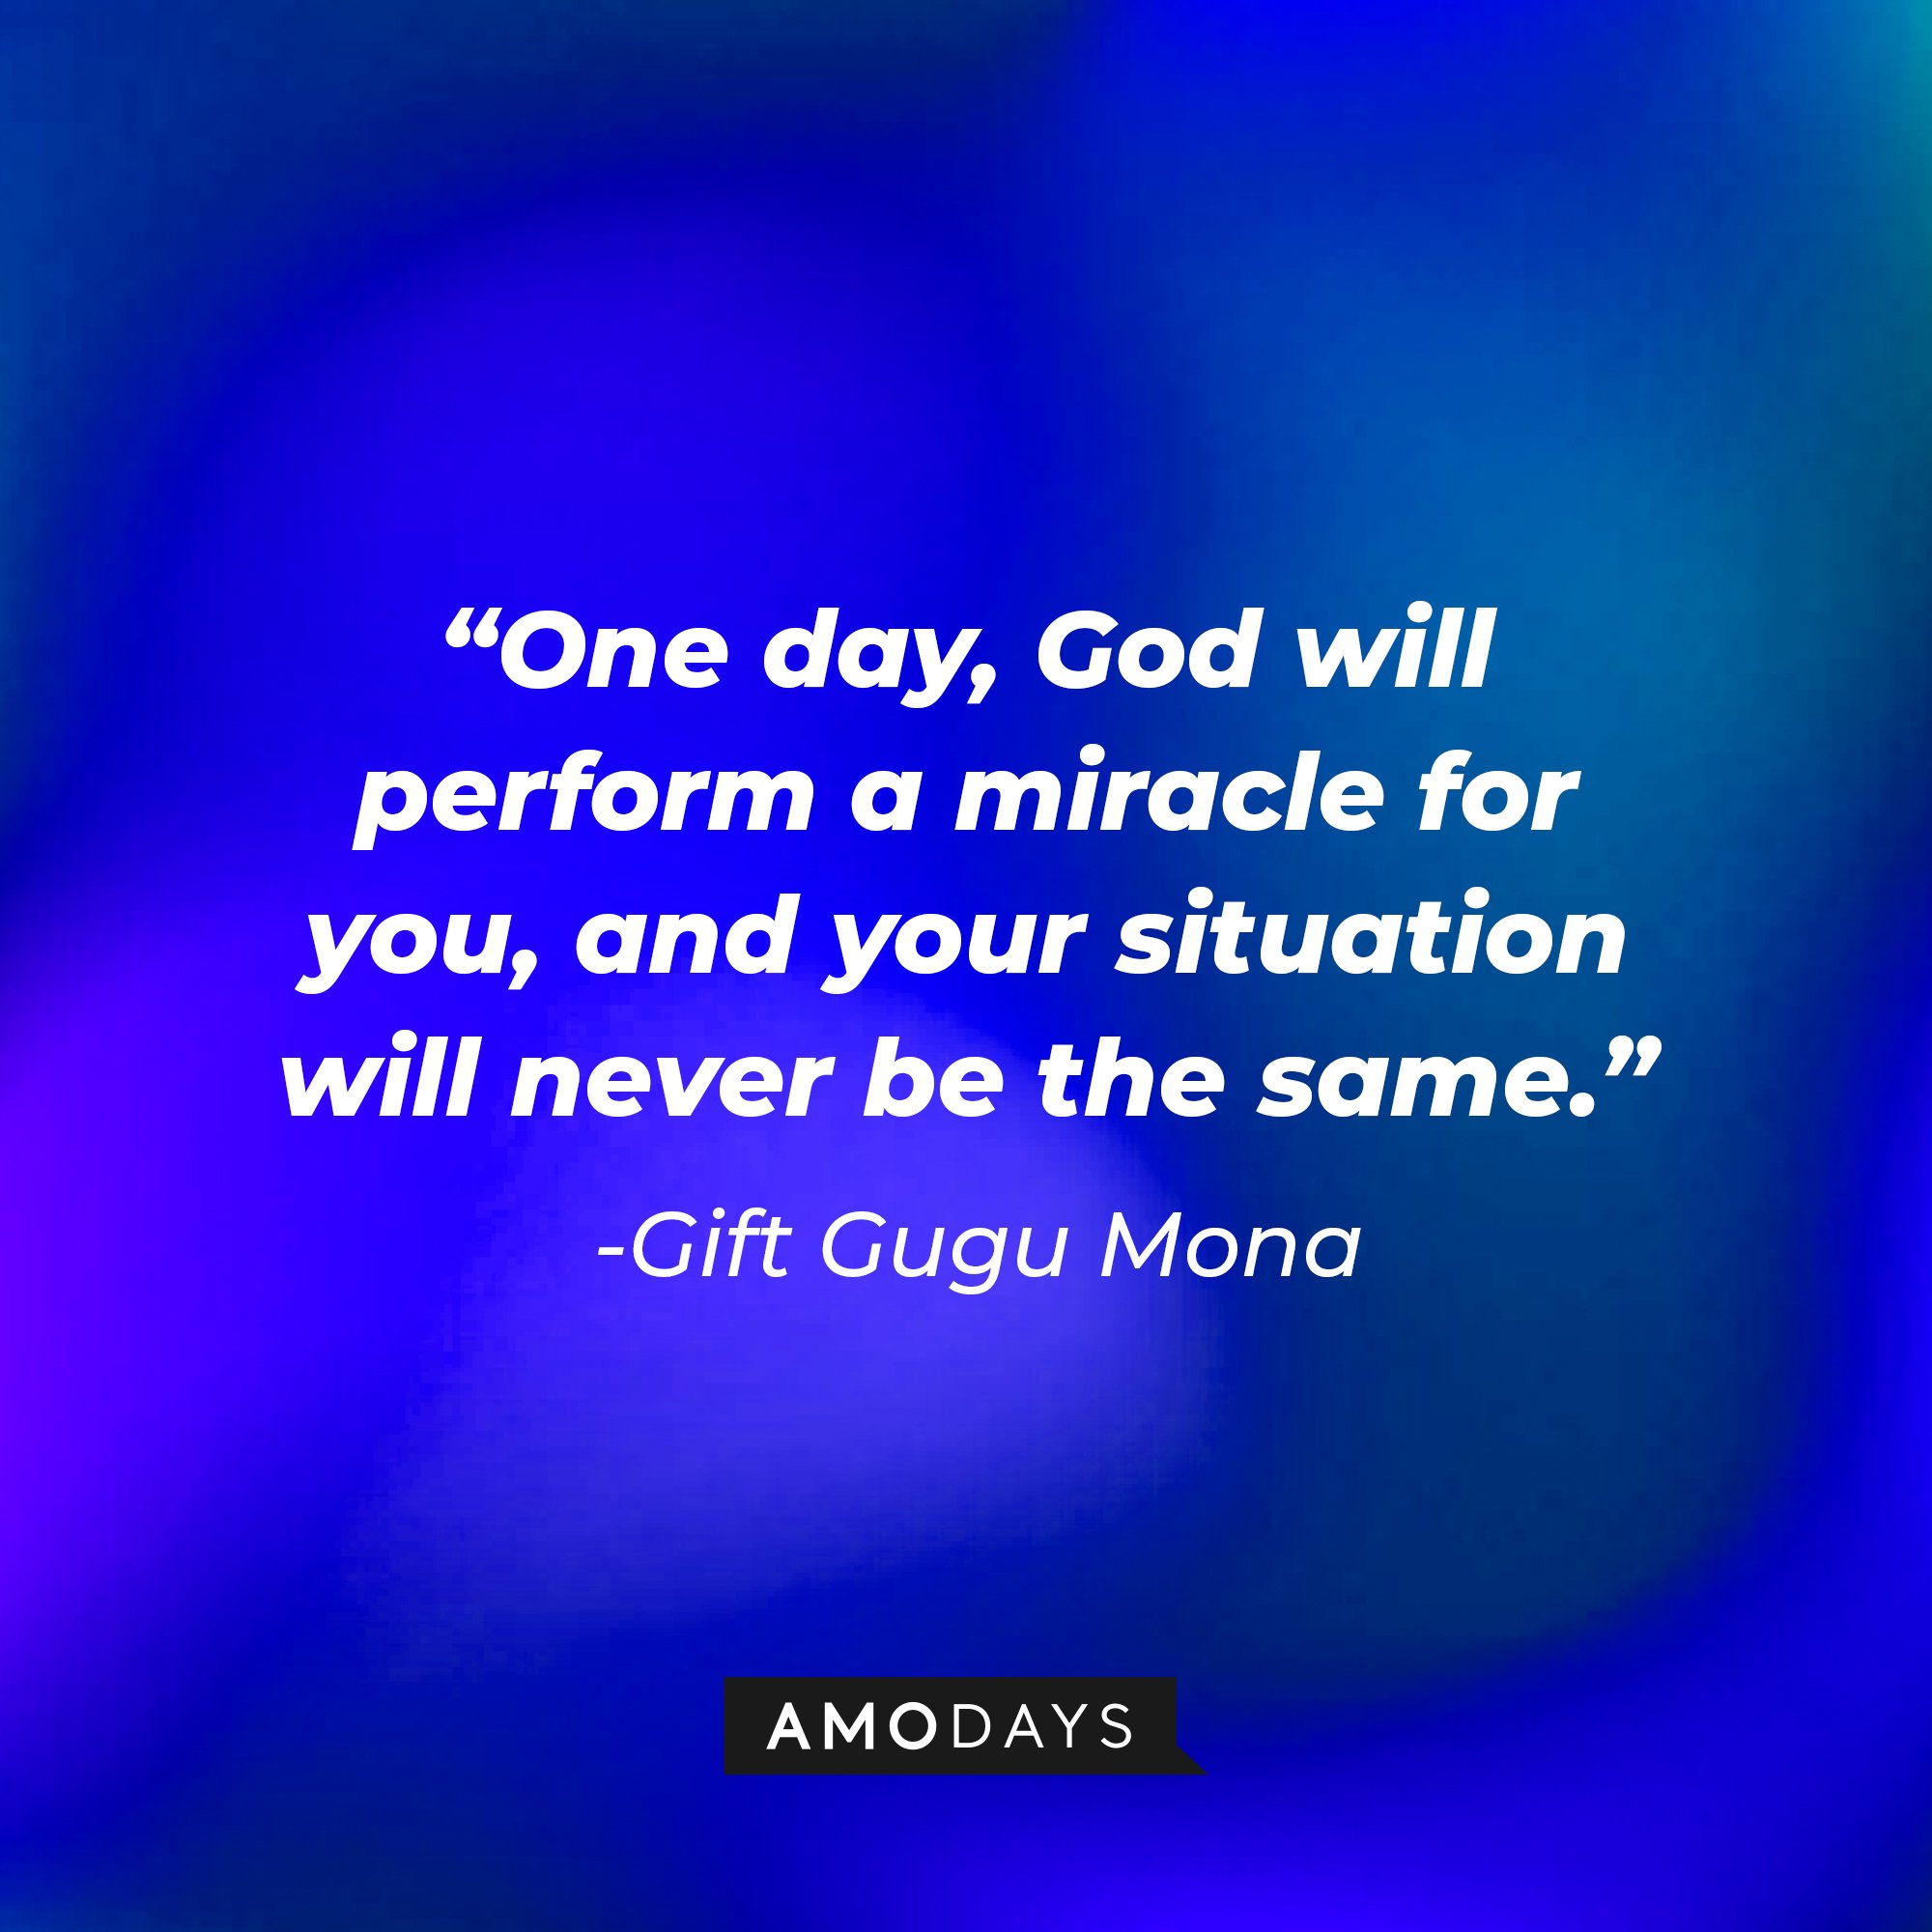 Gift Gugu Mona's quote: "One day, God will perform a miracle for you, and your situation will never be the same." | Image: AmoDays